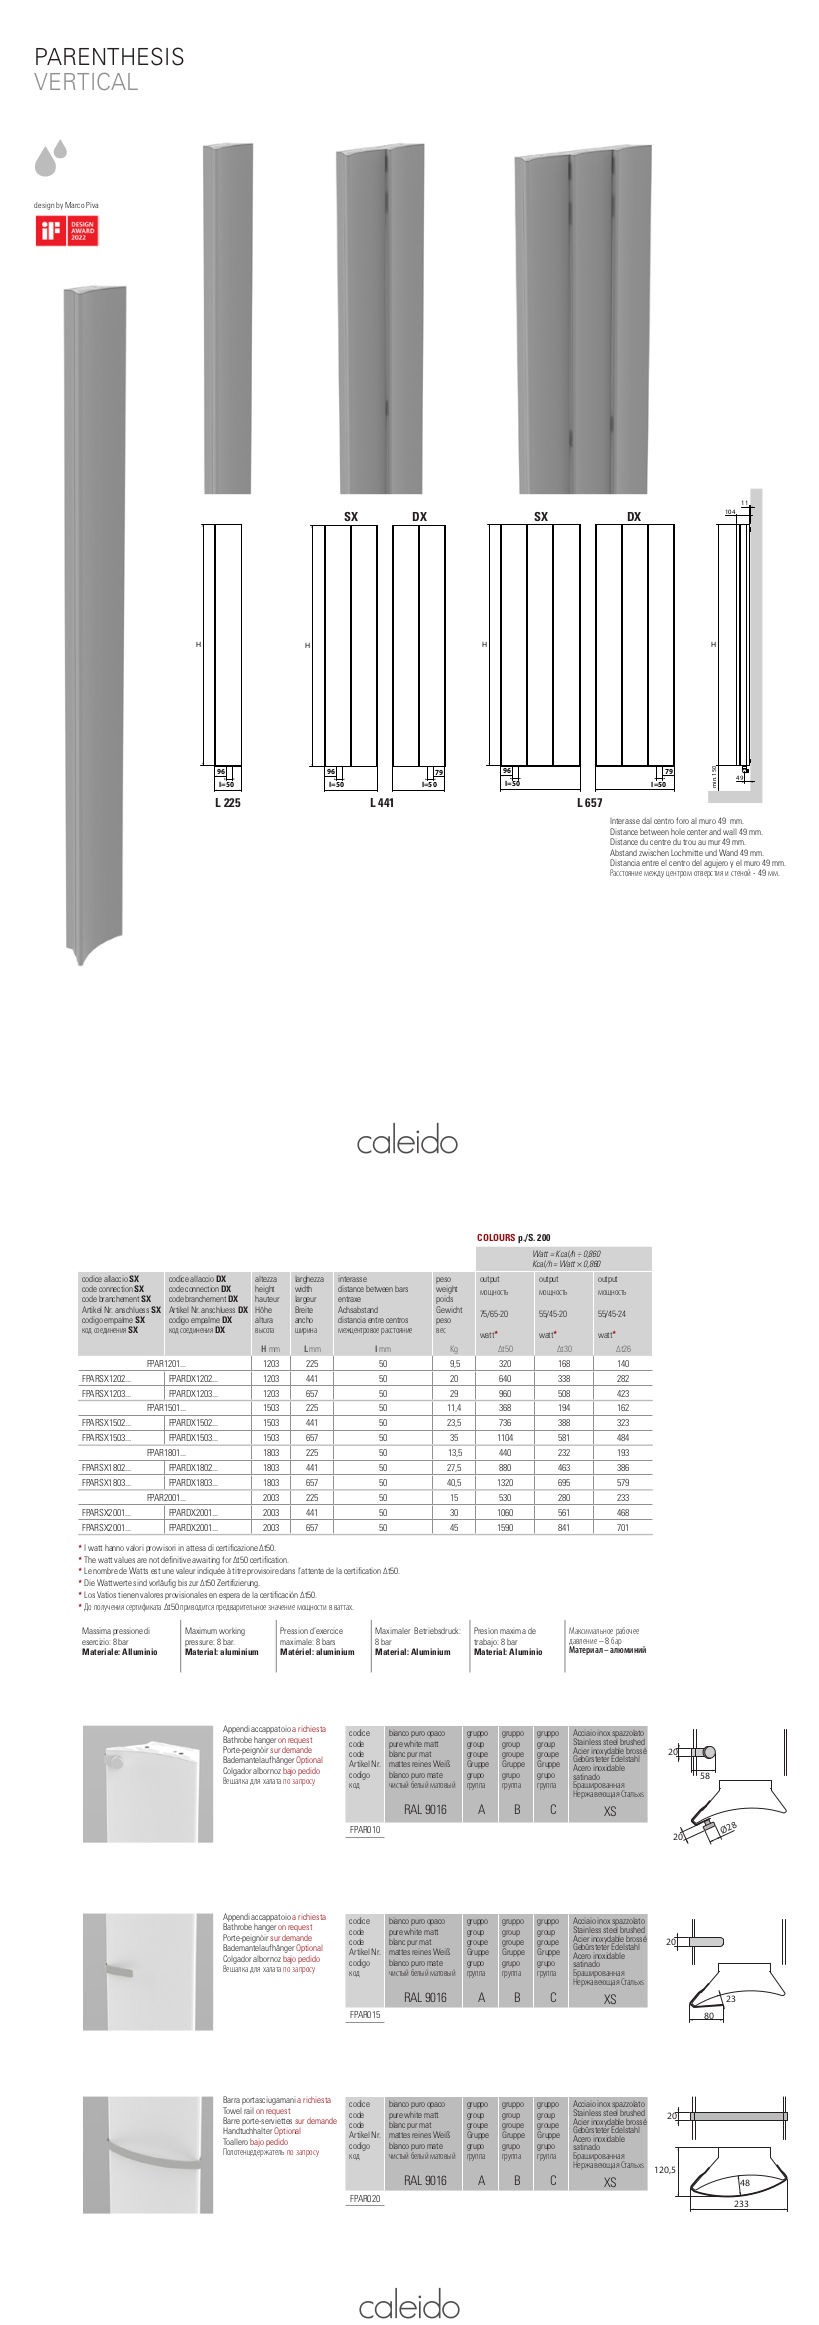 board-technical-termo-furniture-parenthesis-vertical-caleido-new